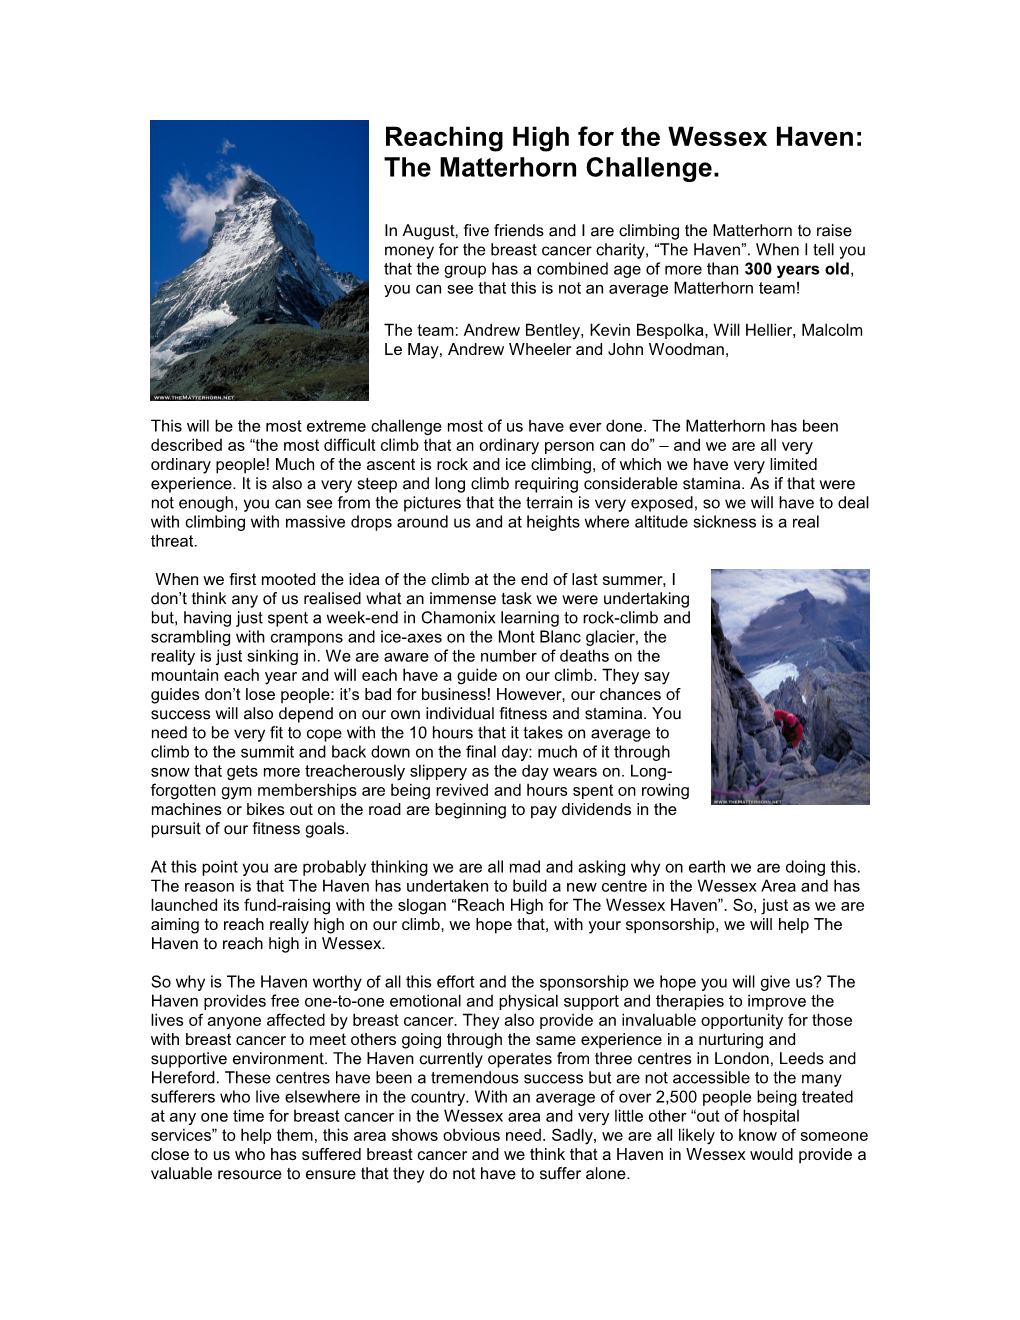 'In August, Five Friends and Myself Are Climbing the Matterhorn to Raise Money for The